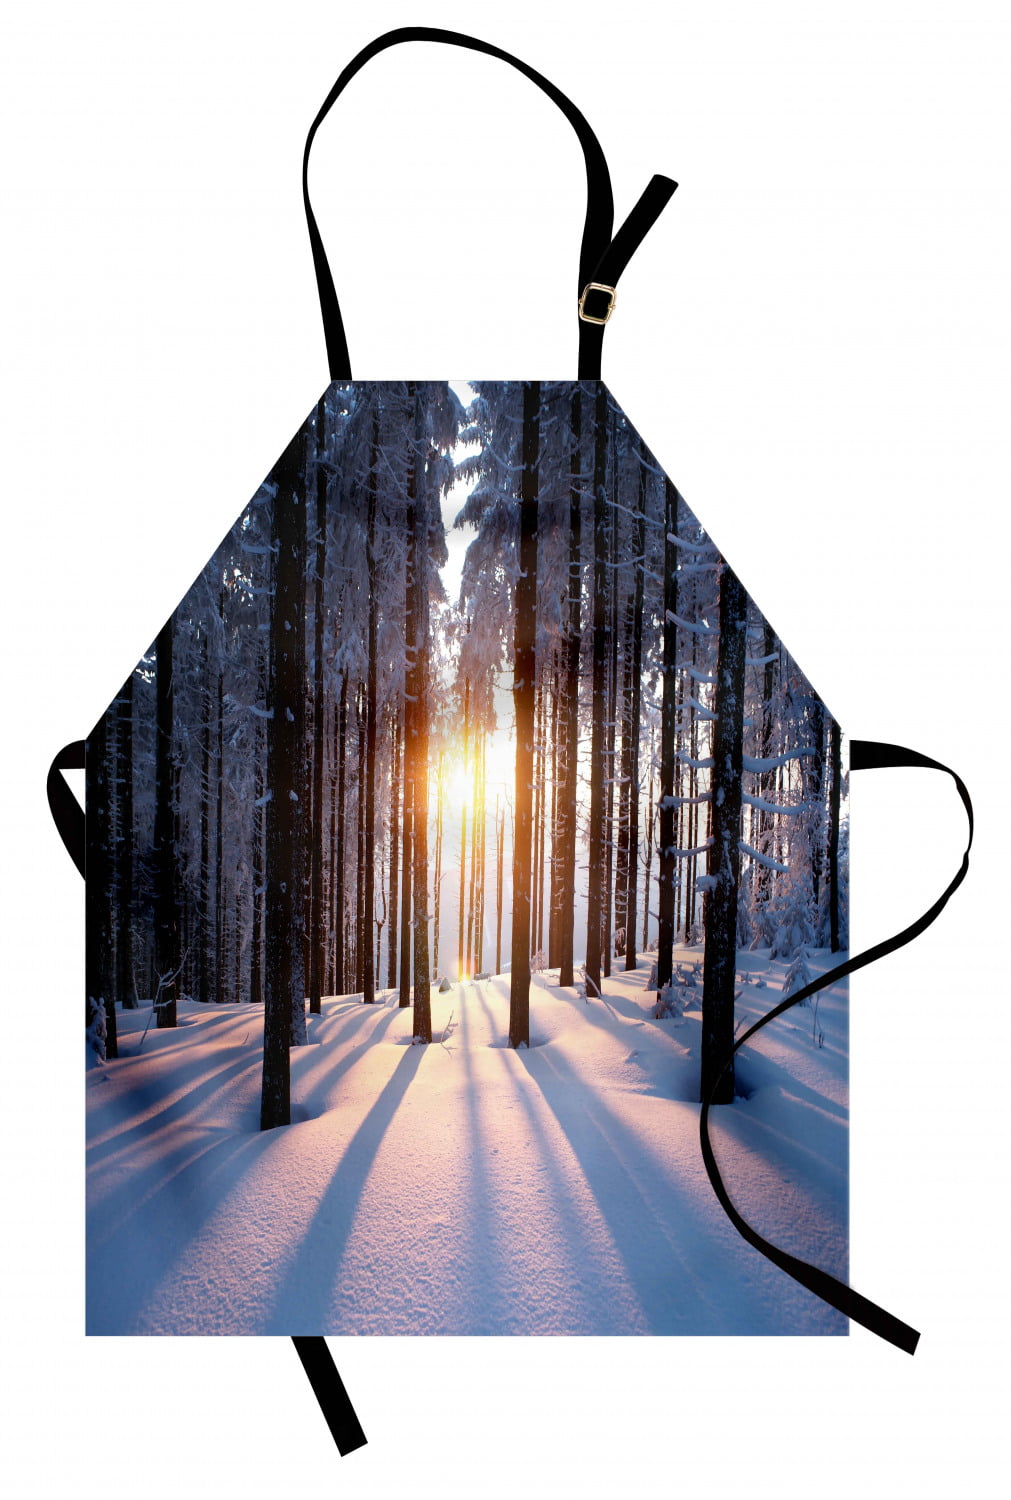 WONDERTIFY Watercolor Foggy Forest Apron,Landscape Winter Hill Wild Nature Frozen Misty Taiga Bib Apron with Adjustable Neck for Men Women,Suitable for Home Kitchen Cooking Waitress Chef Grill Apron